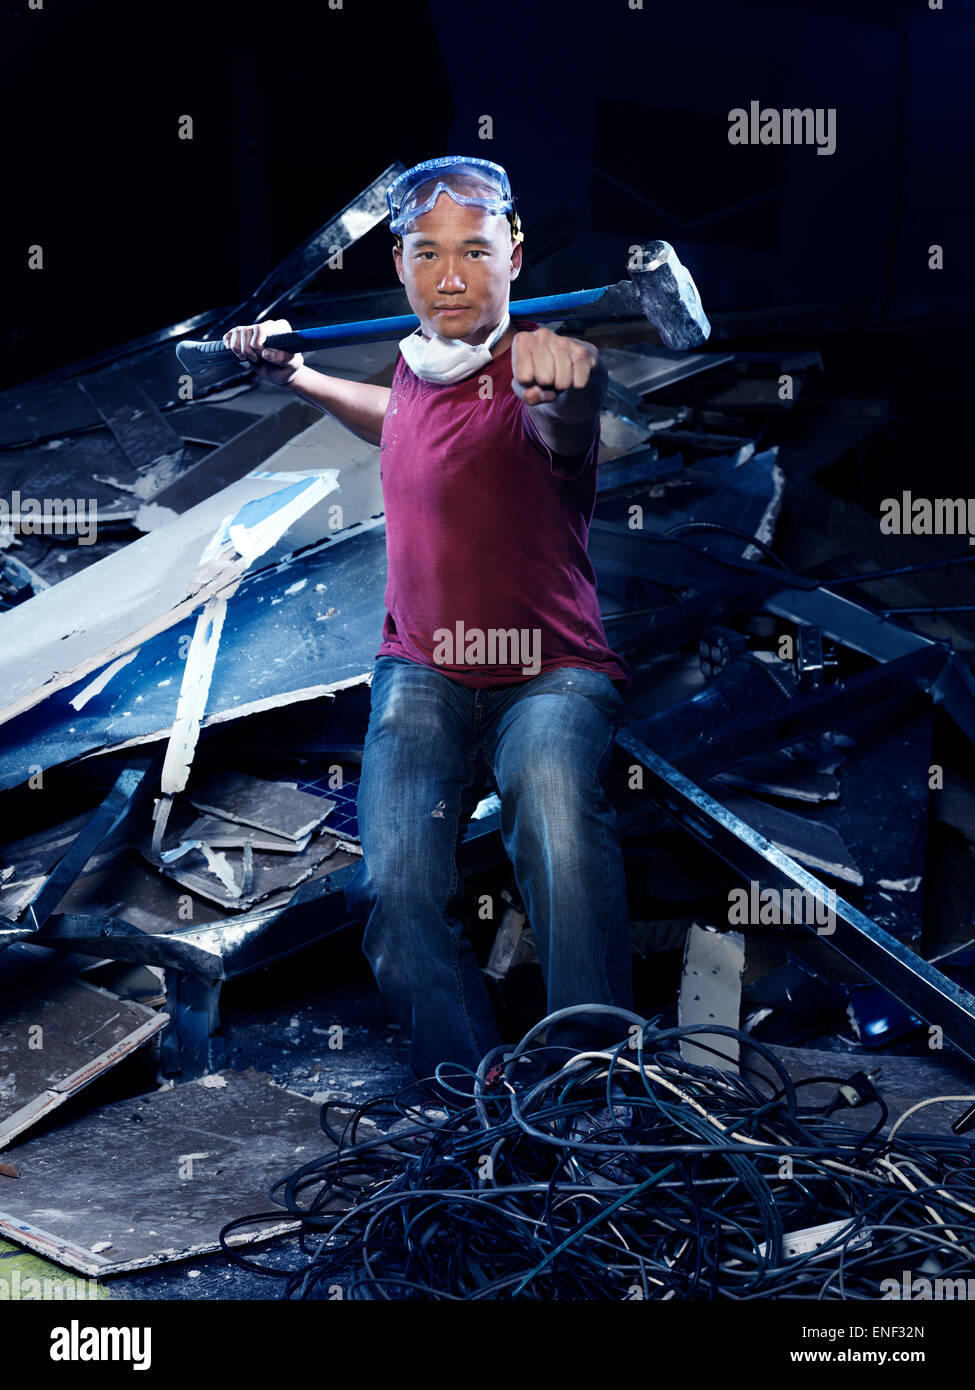 Humorous portrait of a man with a sledgehammer in a Kung Fu stance doing demolition work Stock Photo